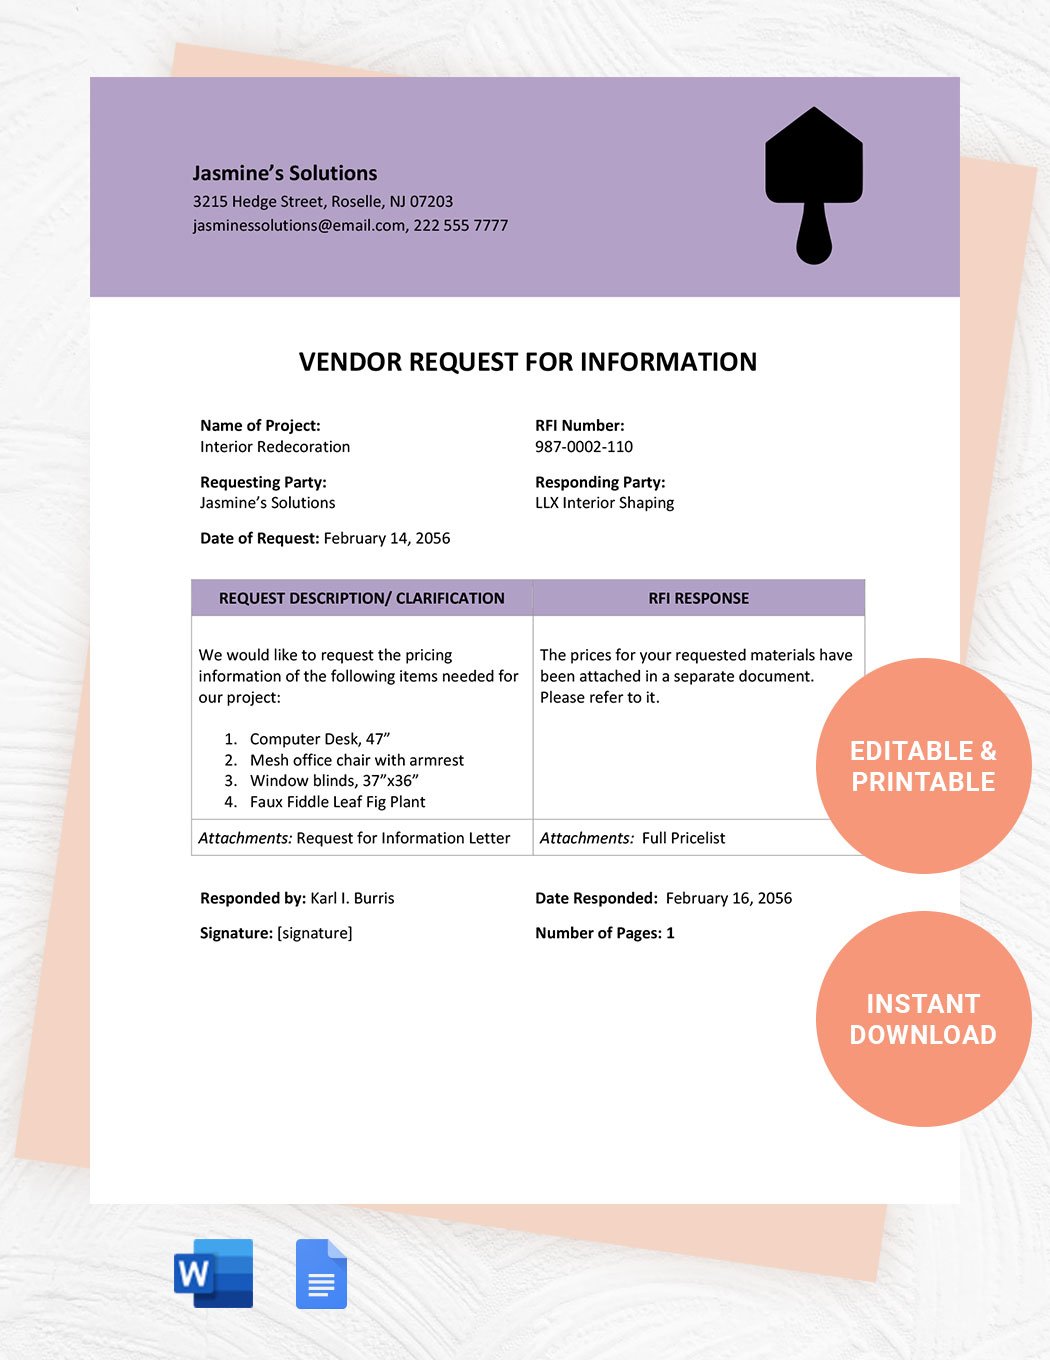 Vendor Request For Information Template in Word, Google Docs